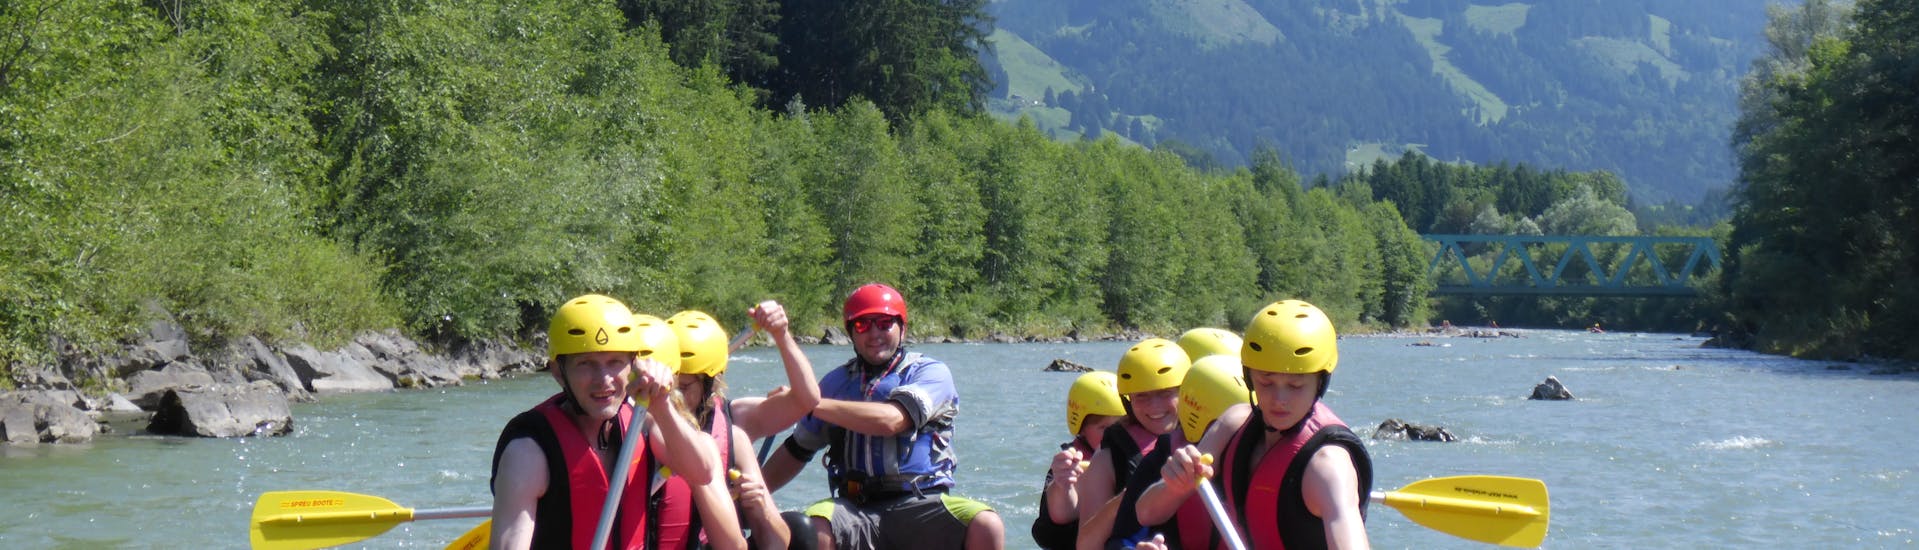 Classic Rafting for groups from 10P - Level 2.